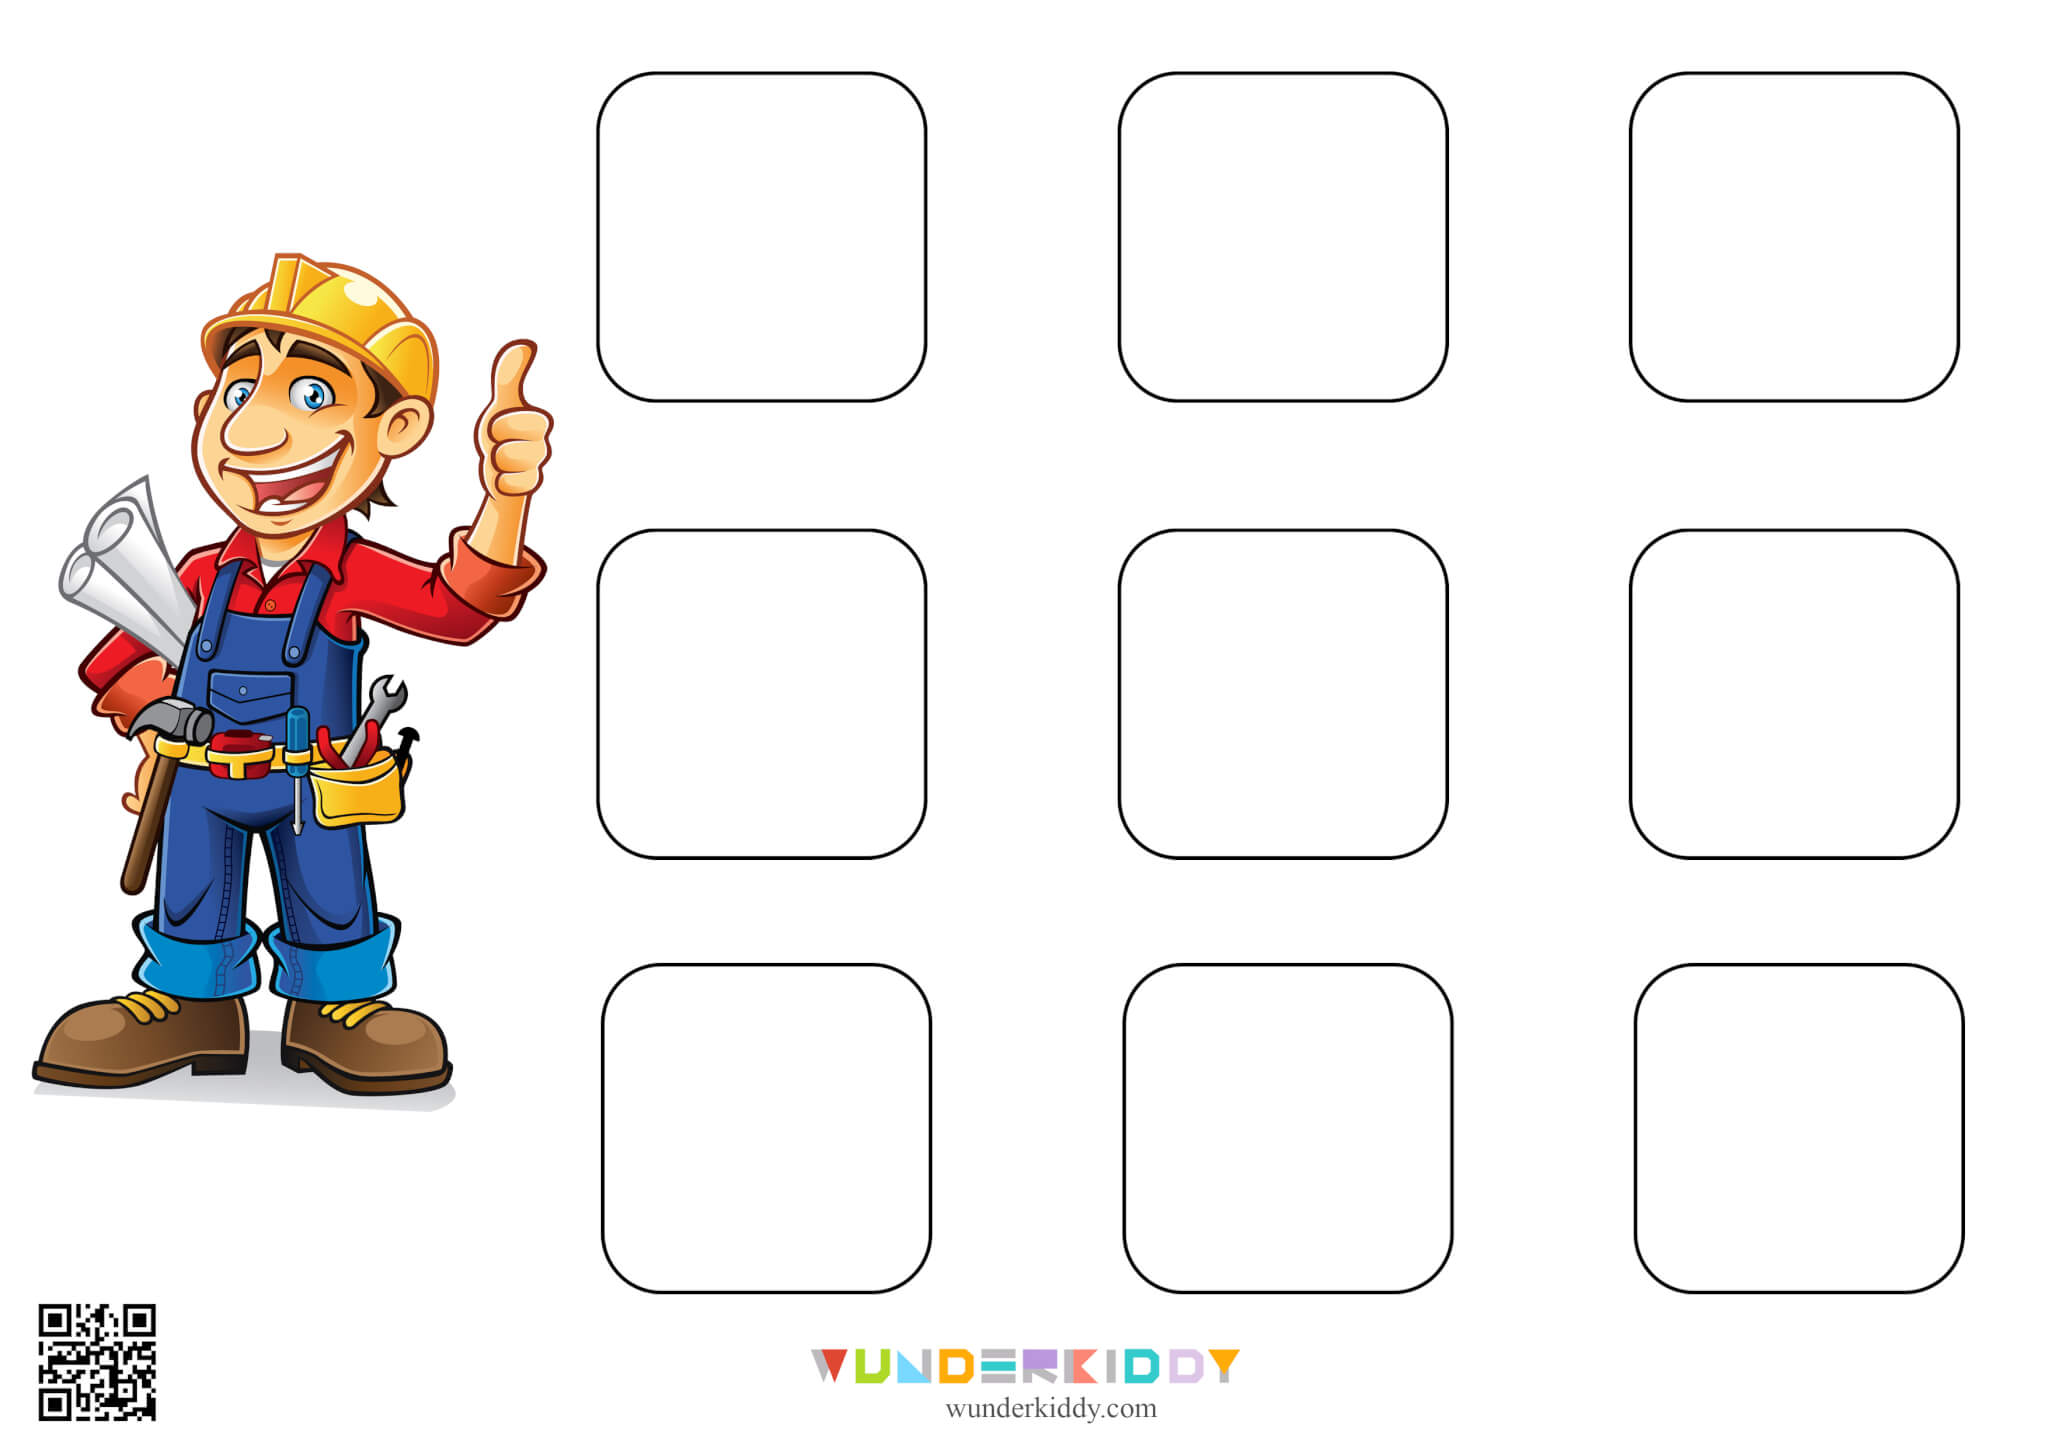 Sorting Worksheet Professions and Tools - Image 9